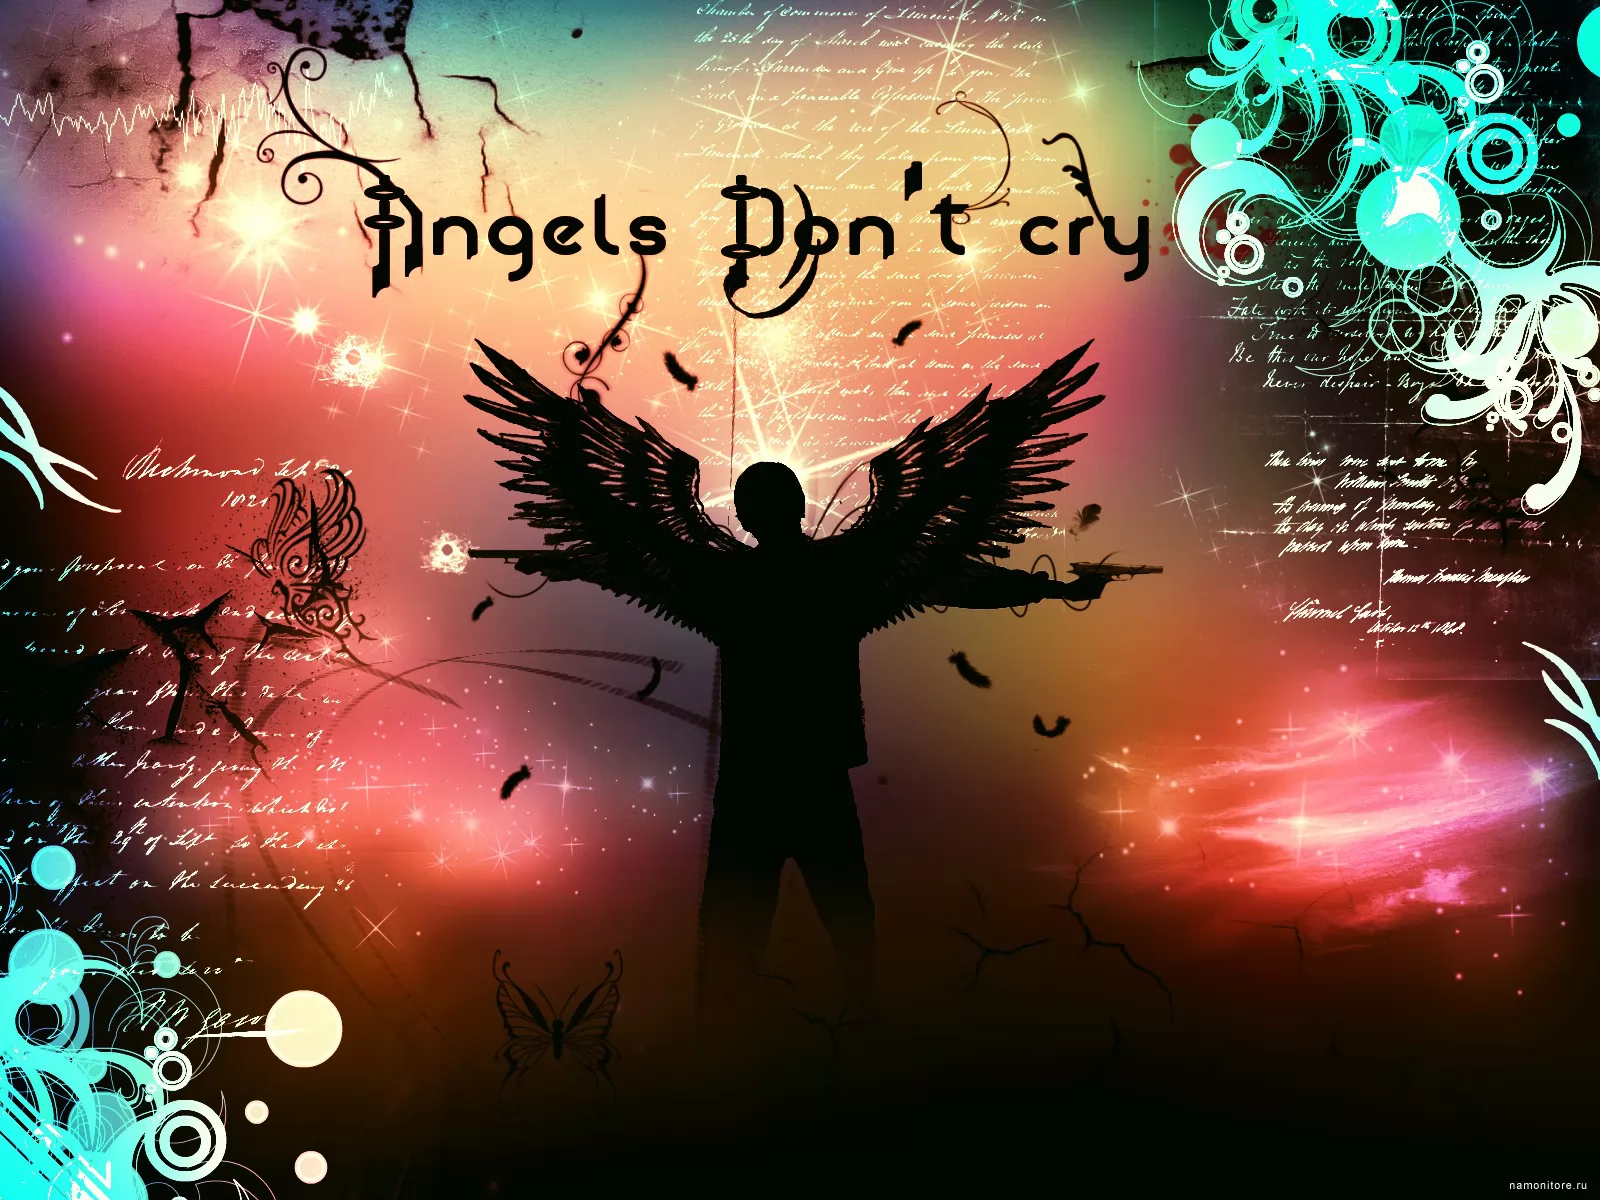 Don t cry. Angels don't Cry Ellise. Картинка don't Cry. Обои Angels don't Cry.